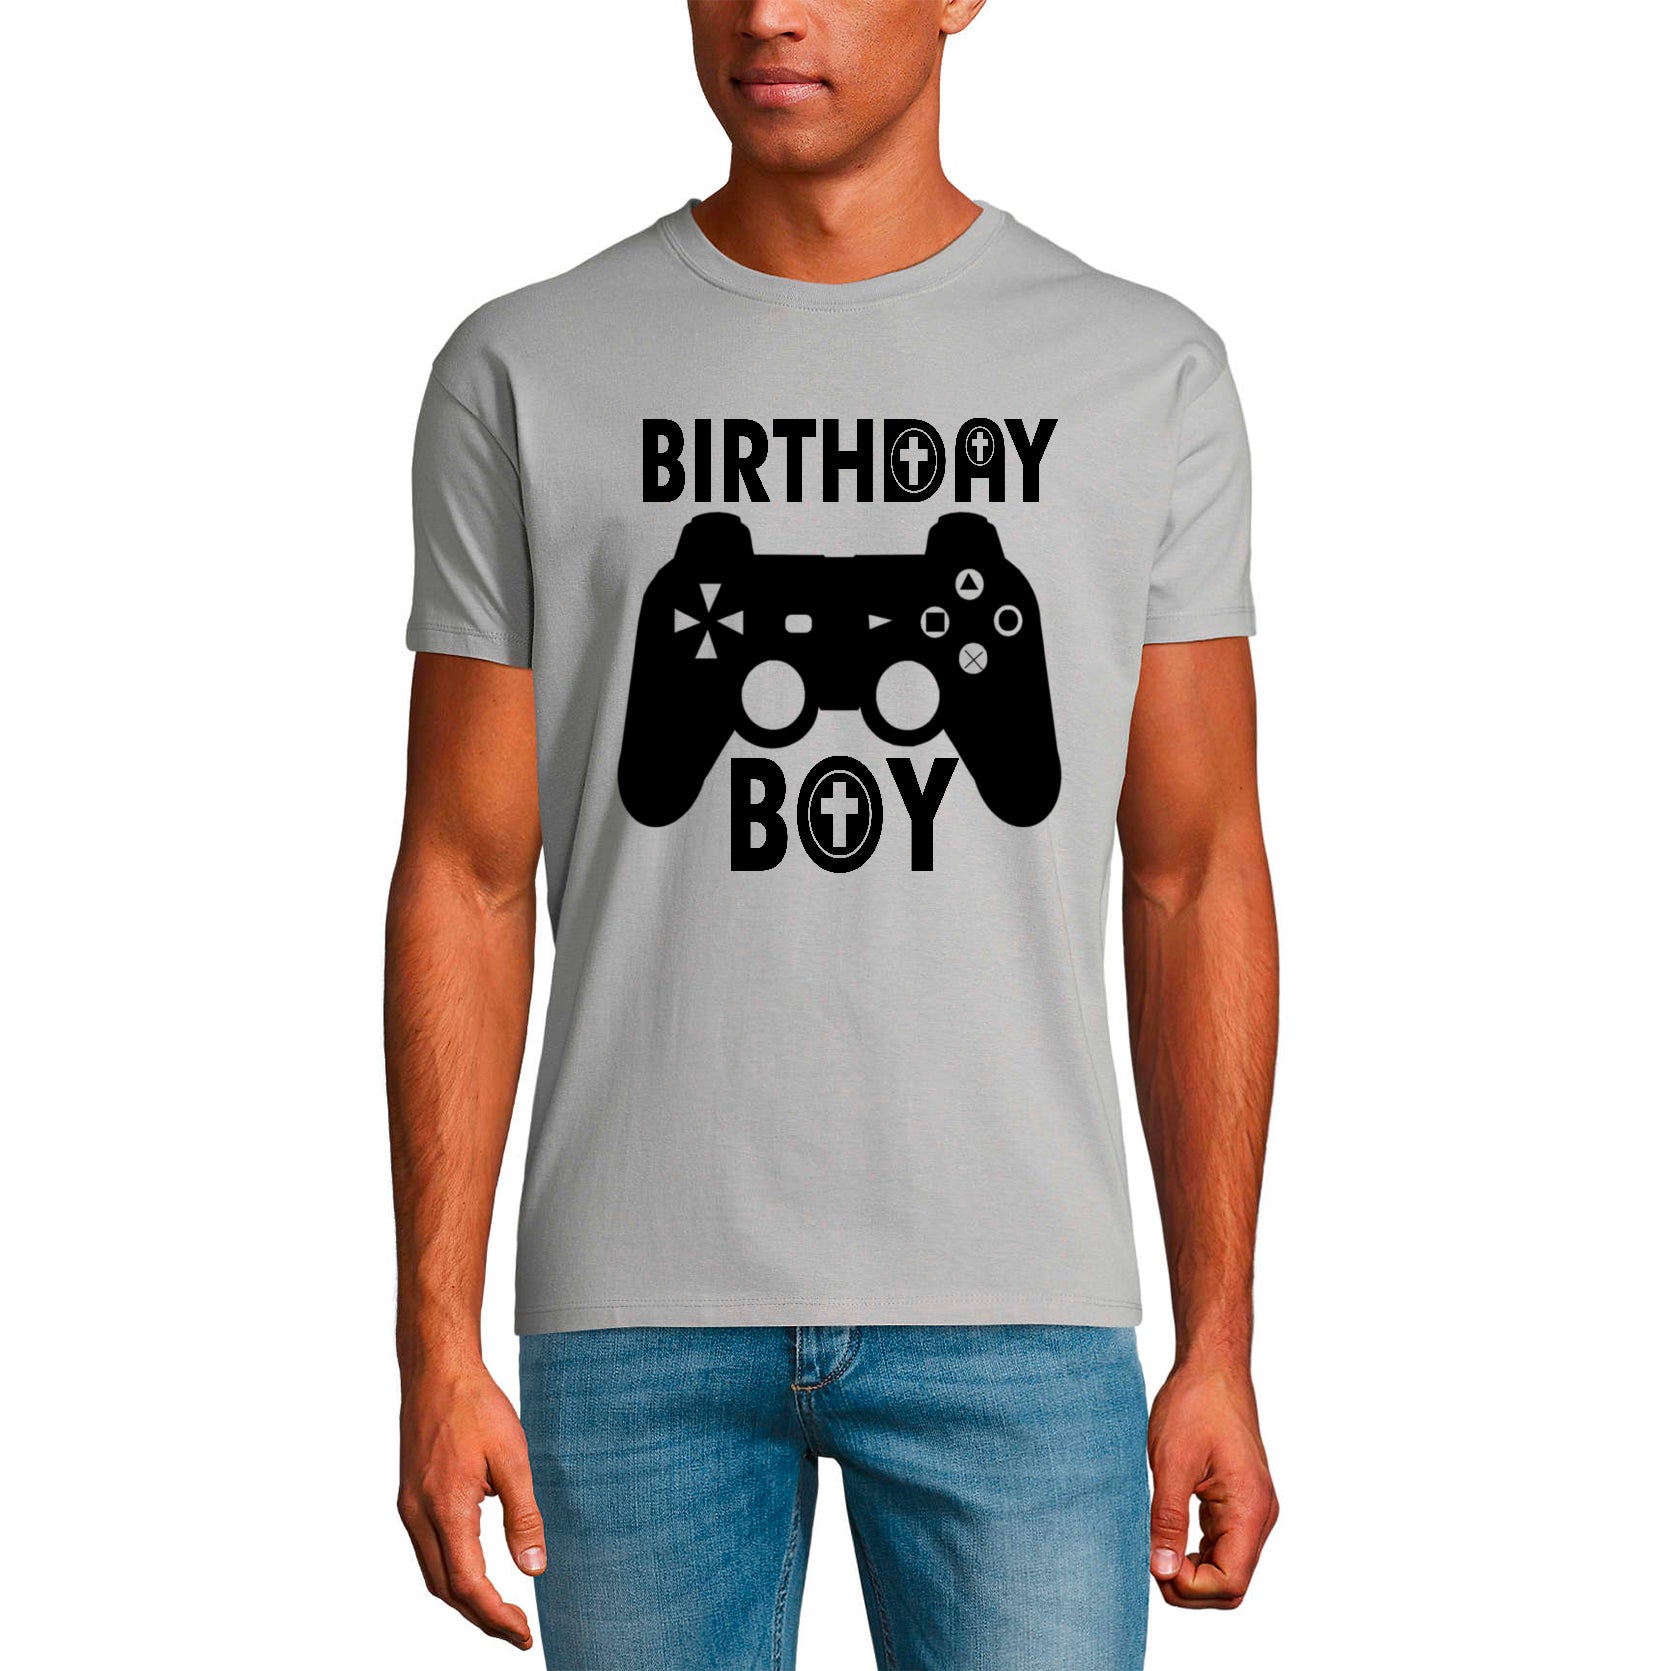 ULTRABASIC Men's T-Shirt Birthday Boy Controller - Gaming Shirt for Player mode on level up dad gamer i paused my game alien player ufo playstation tee shirt clothes gaming apparel gifts super mario nintendo call of duty graphic tshirt video game funny geek gift for the gamer fortnite pubg humor son father birthday